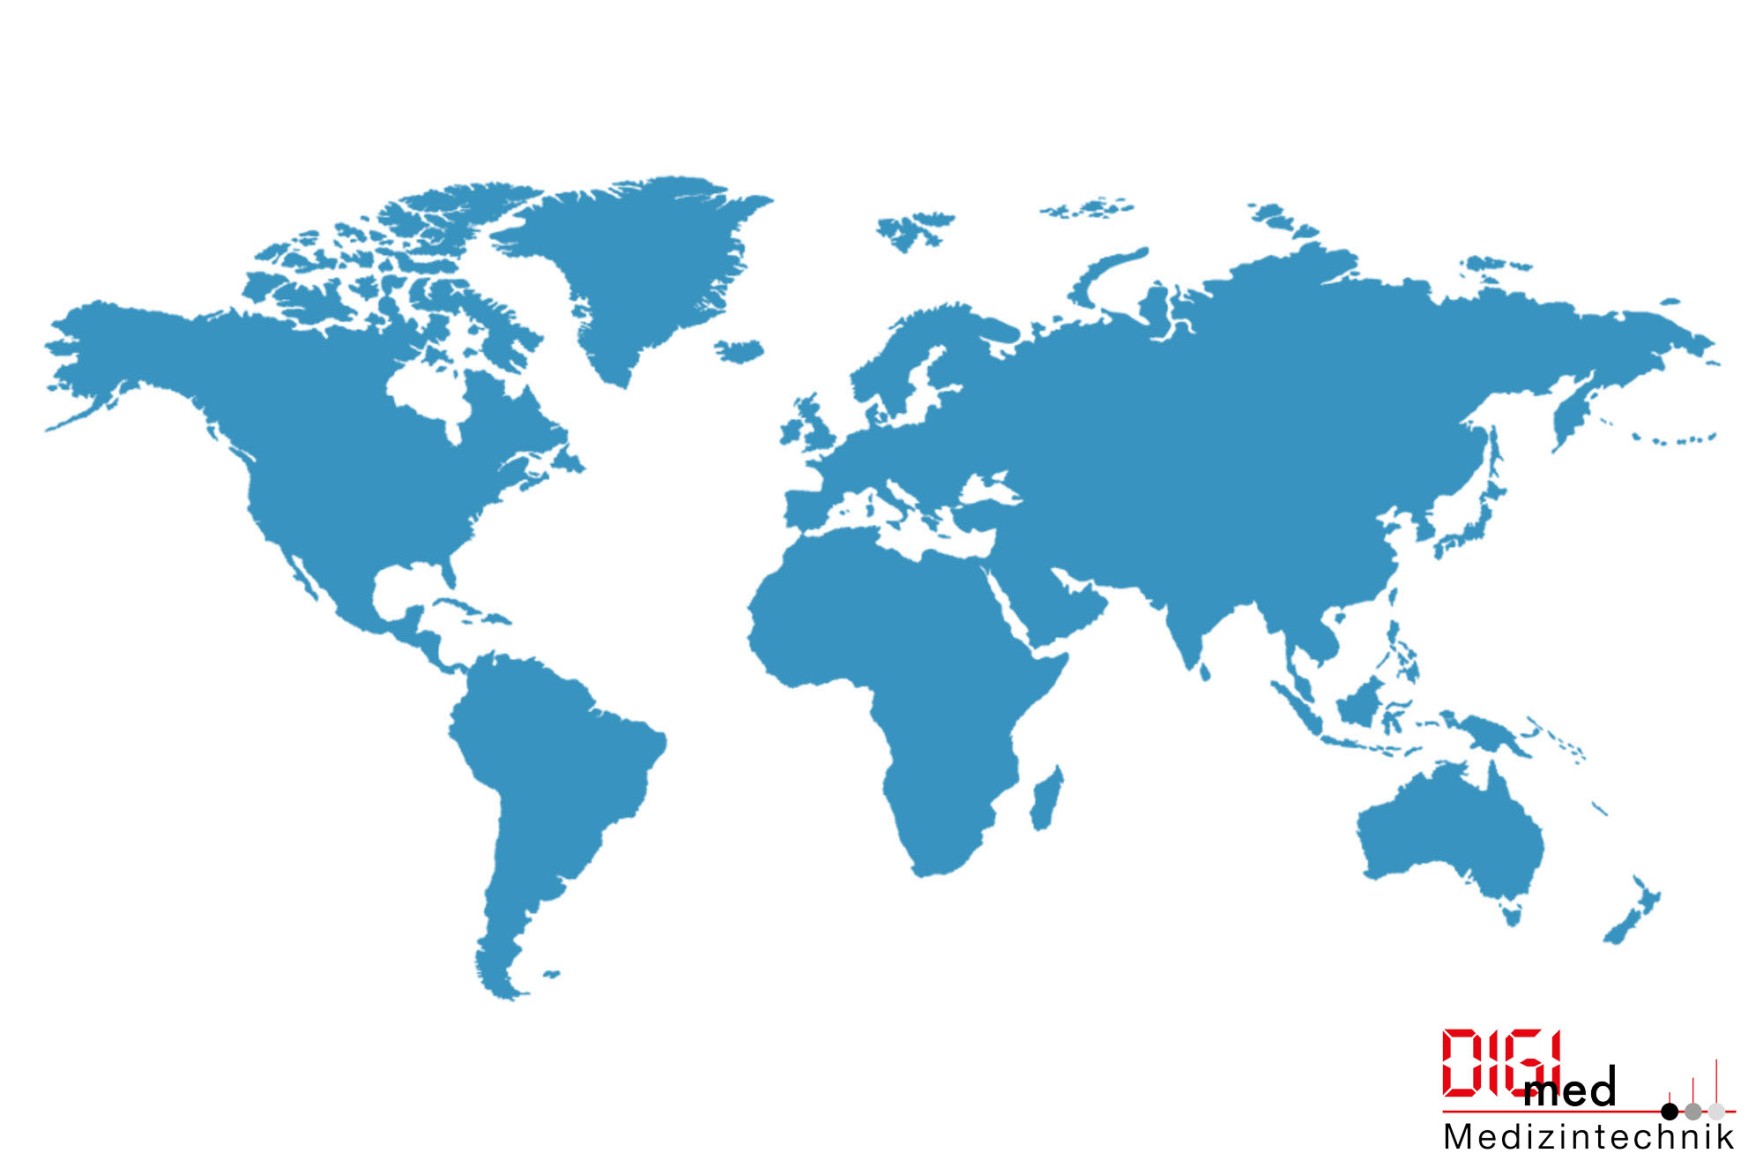 Representations World Map Distributor Wanted for digimed MEdical Technology